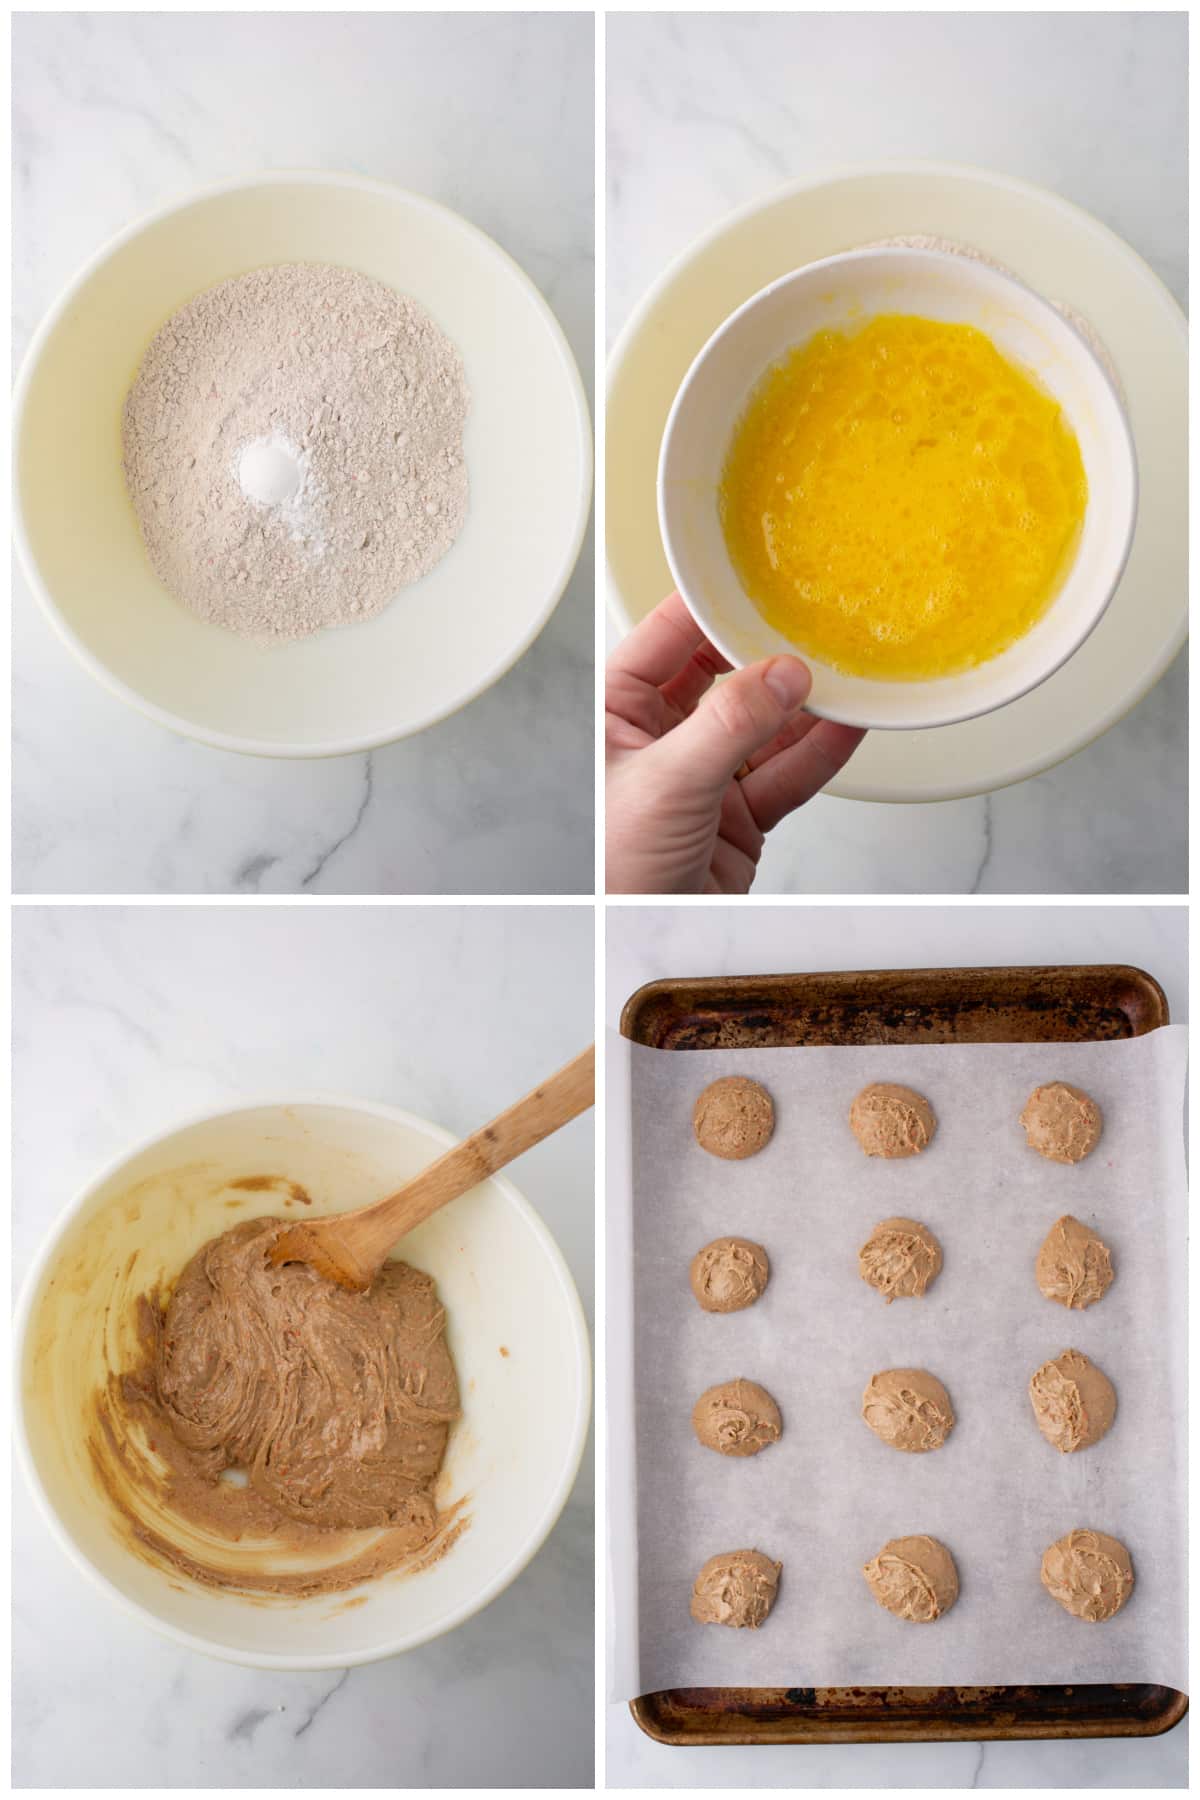 Instructions to make the recipe with images.